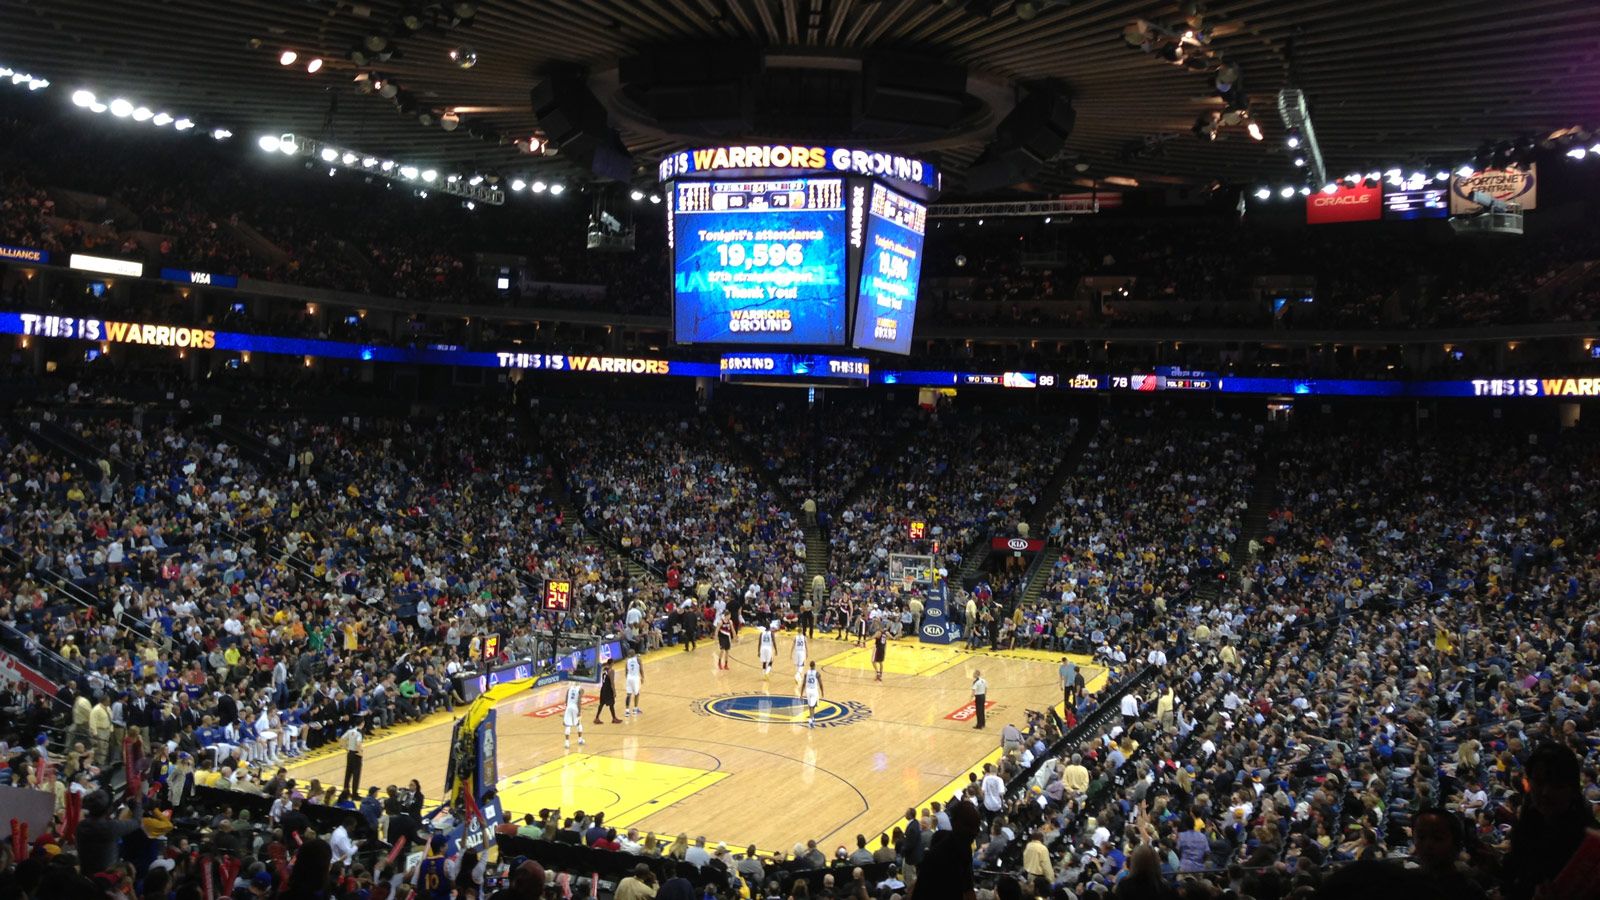 A packed arena watching a basketball game. The large display above the court names the Warriors as one of the teams playing.